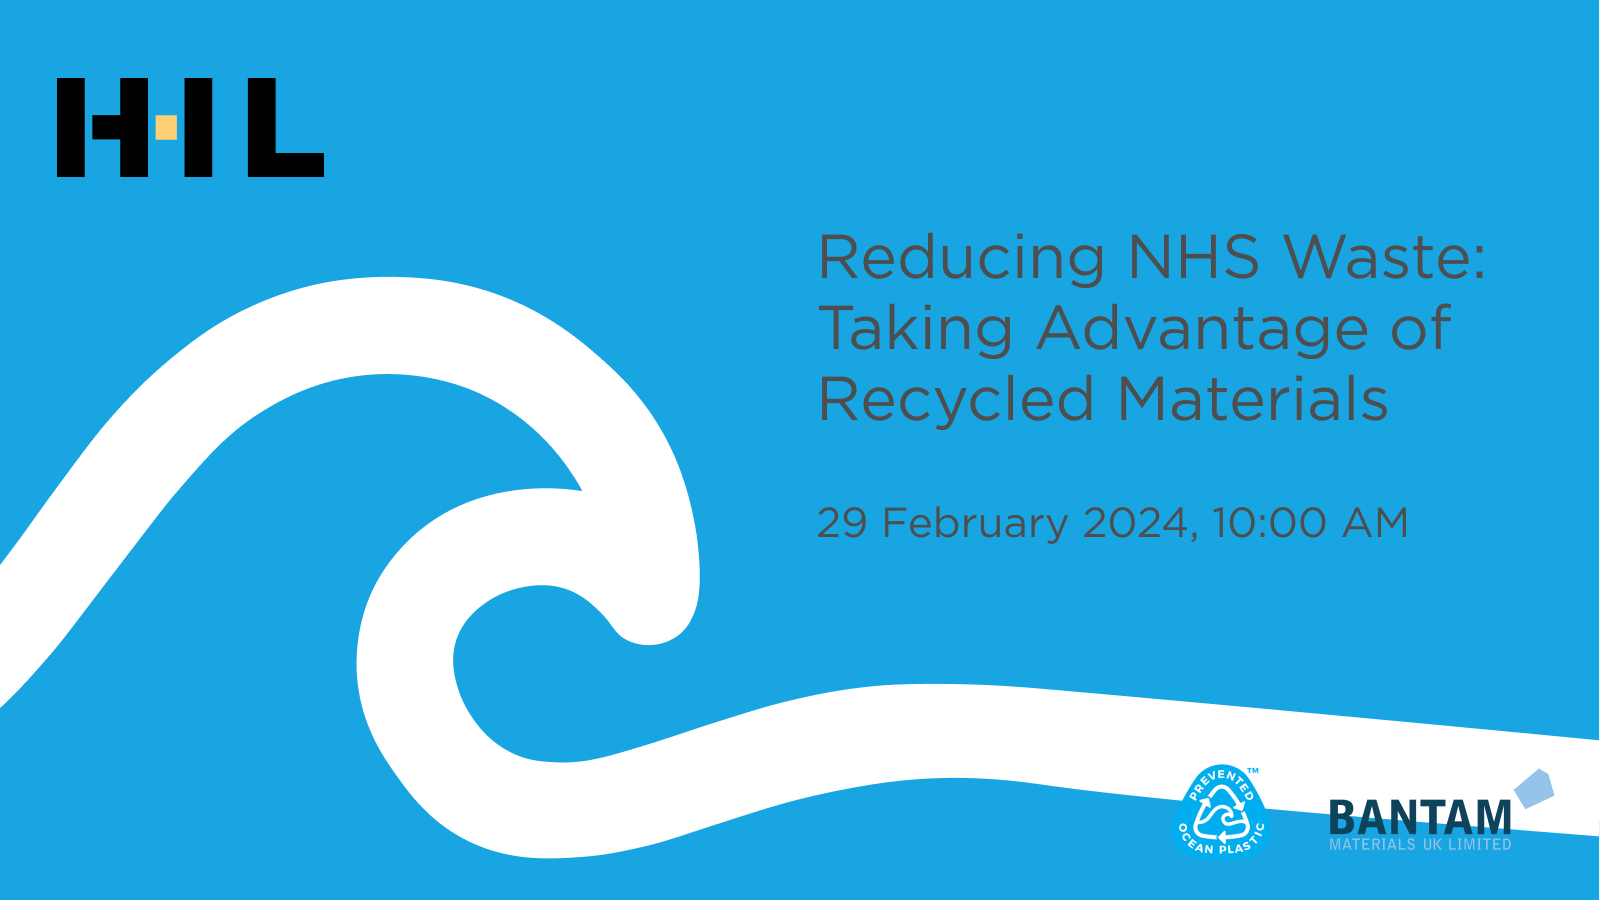 Reducing NHS Waste: Taking Advantage of Recycled Materials